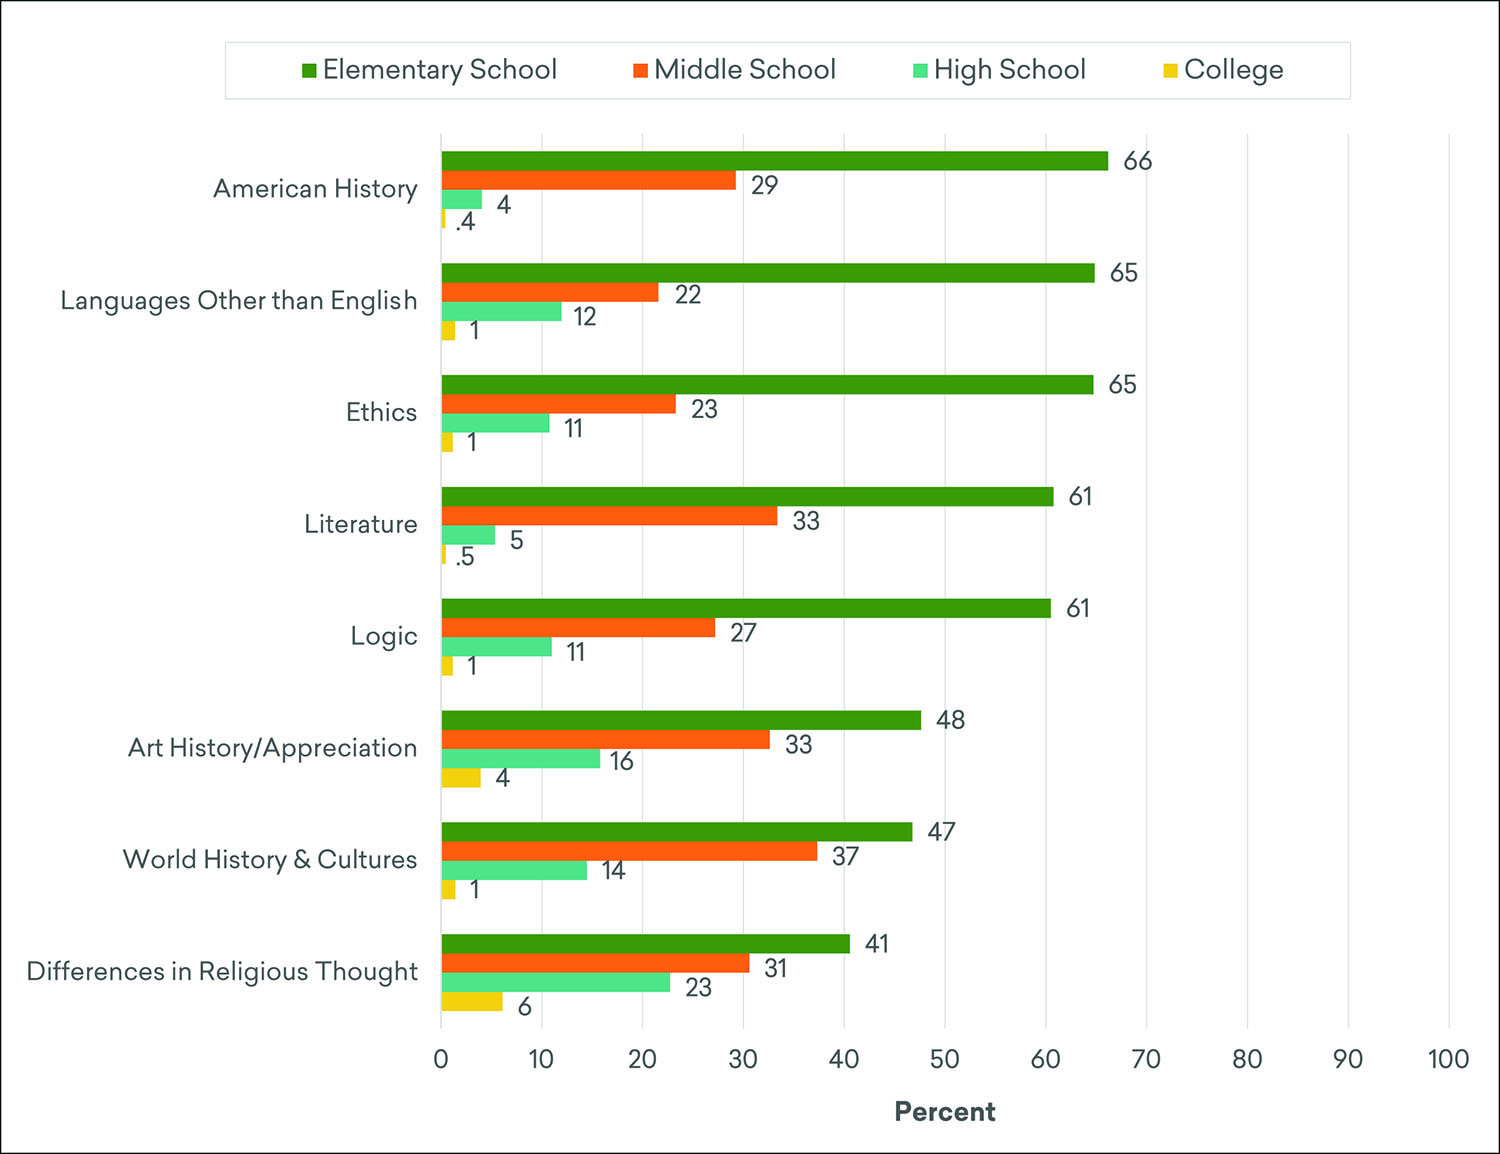 School Level at Which Adults Believe the Humanities Should First Be Taught to Children (Estimated Distribution), by Subject, Fall 2019